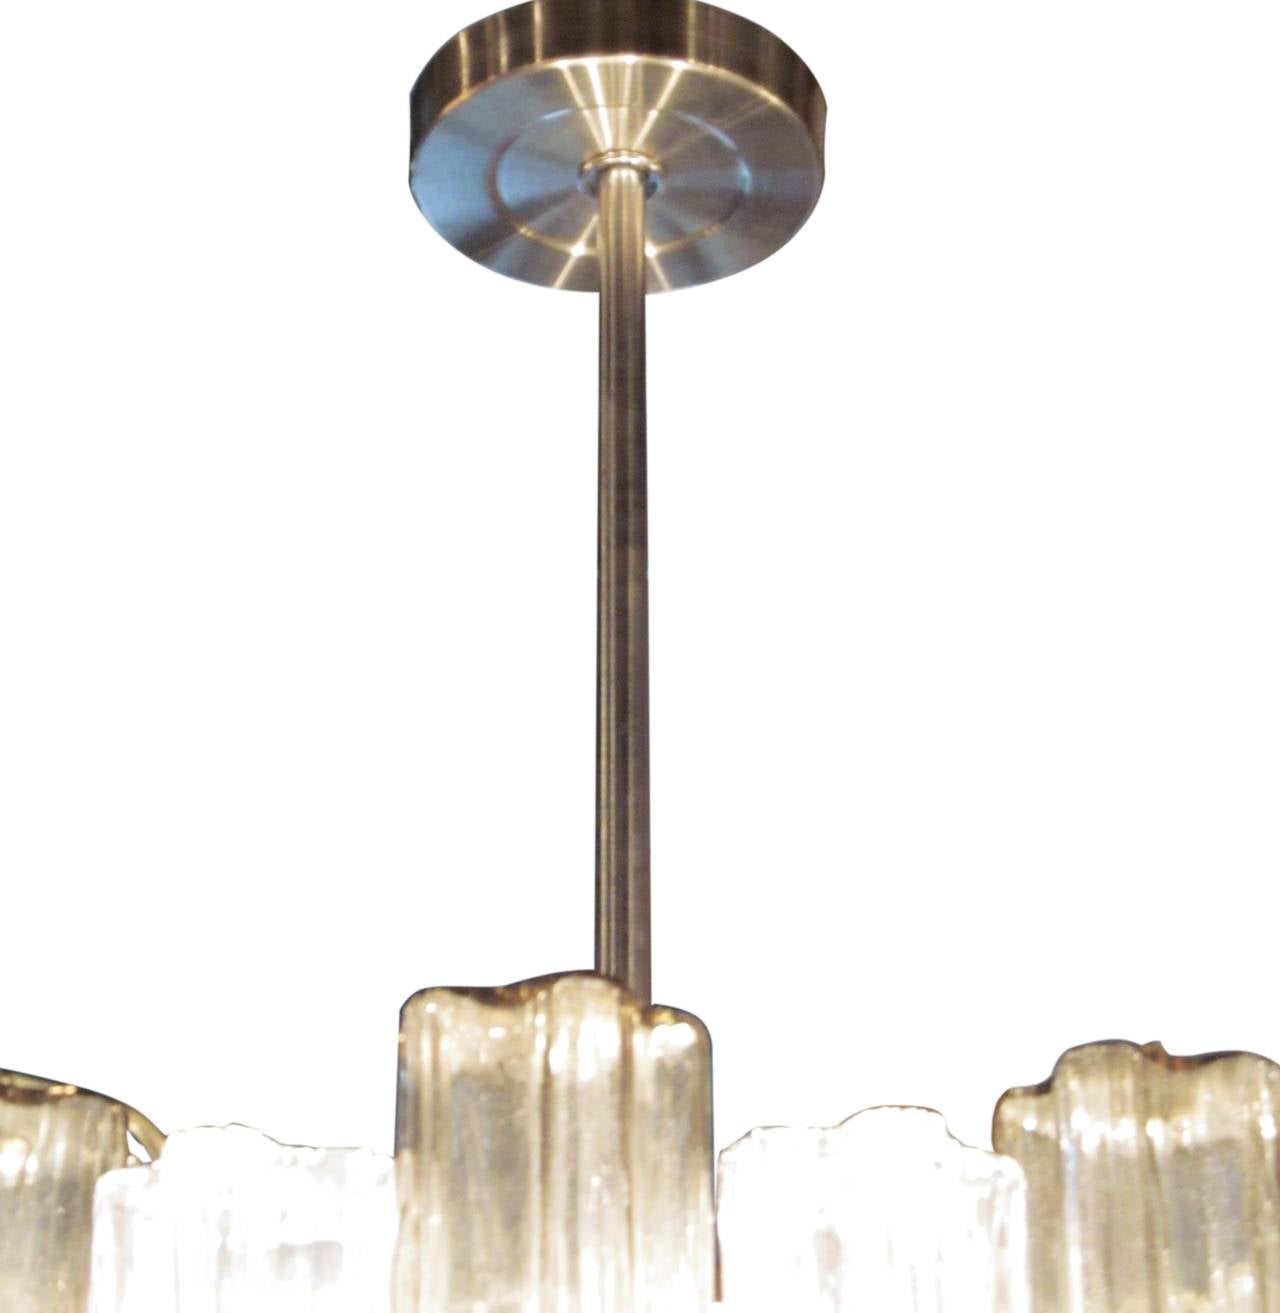 1960s Mid-Century Modern Murano tronchi three tiered pendant light by Venini with smoked and clear crystals.
This can be seen at our 2420 Broadway location on the upper west side in Manhattan.